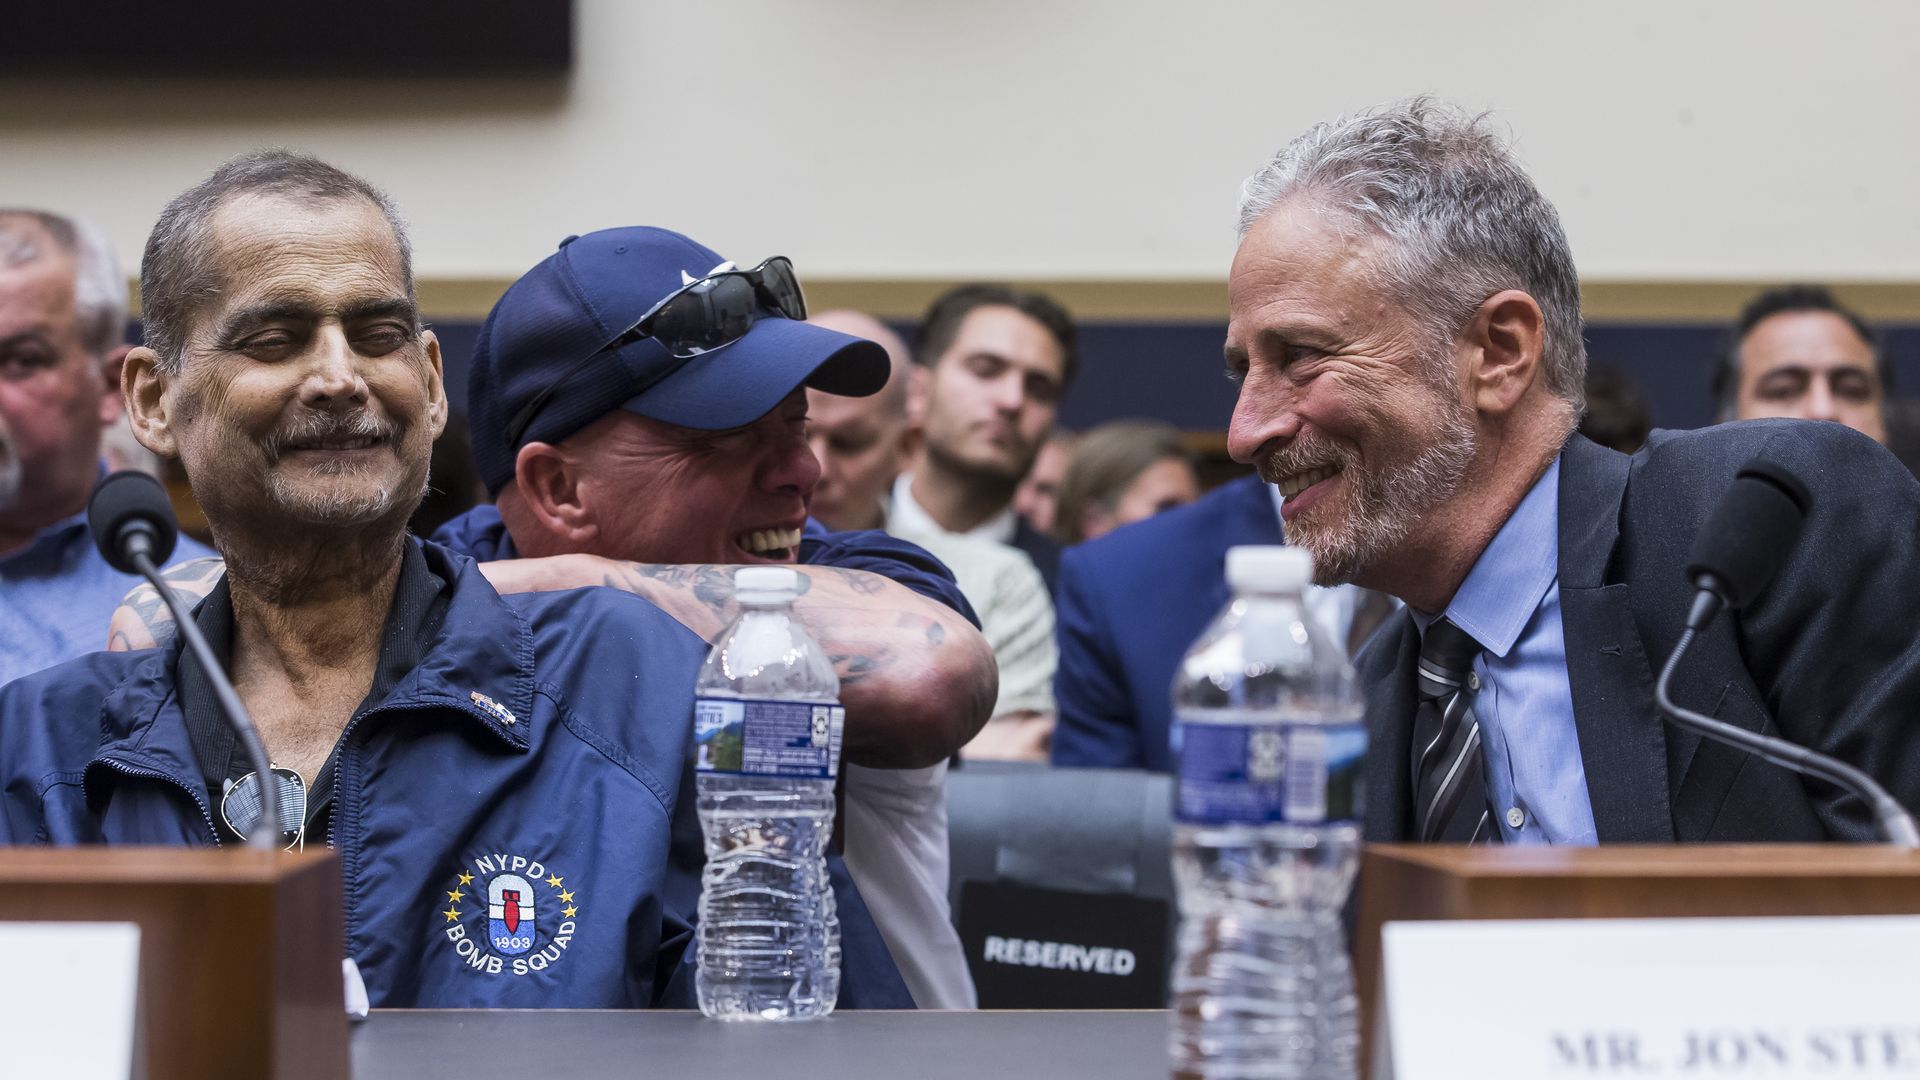 Former Daily Show host Jon Stewart speaking to a 9/11 first responder at the House Judiciary Committee meeting